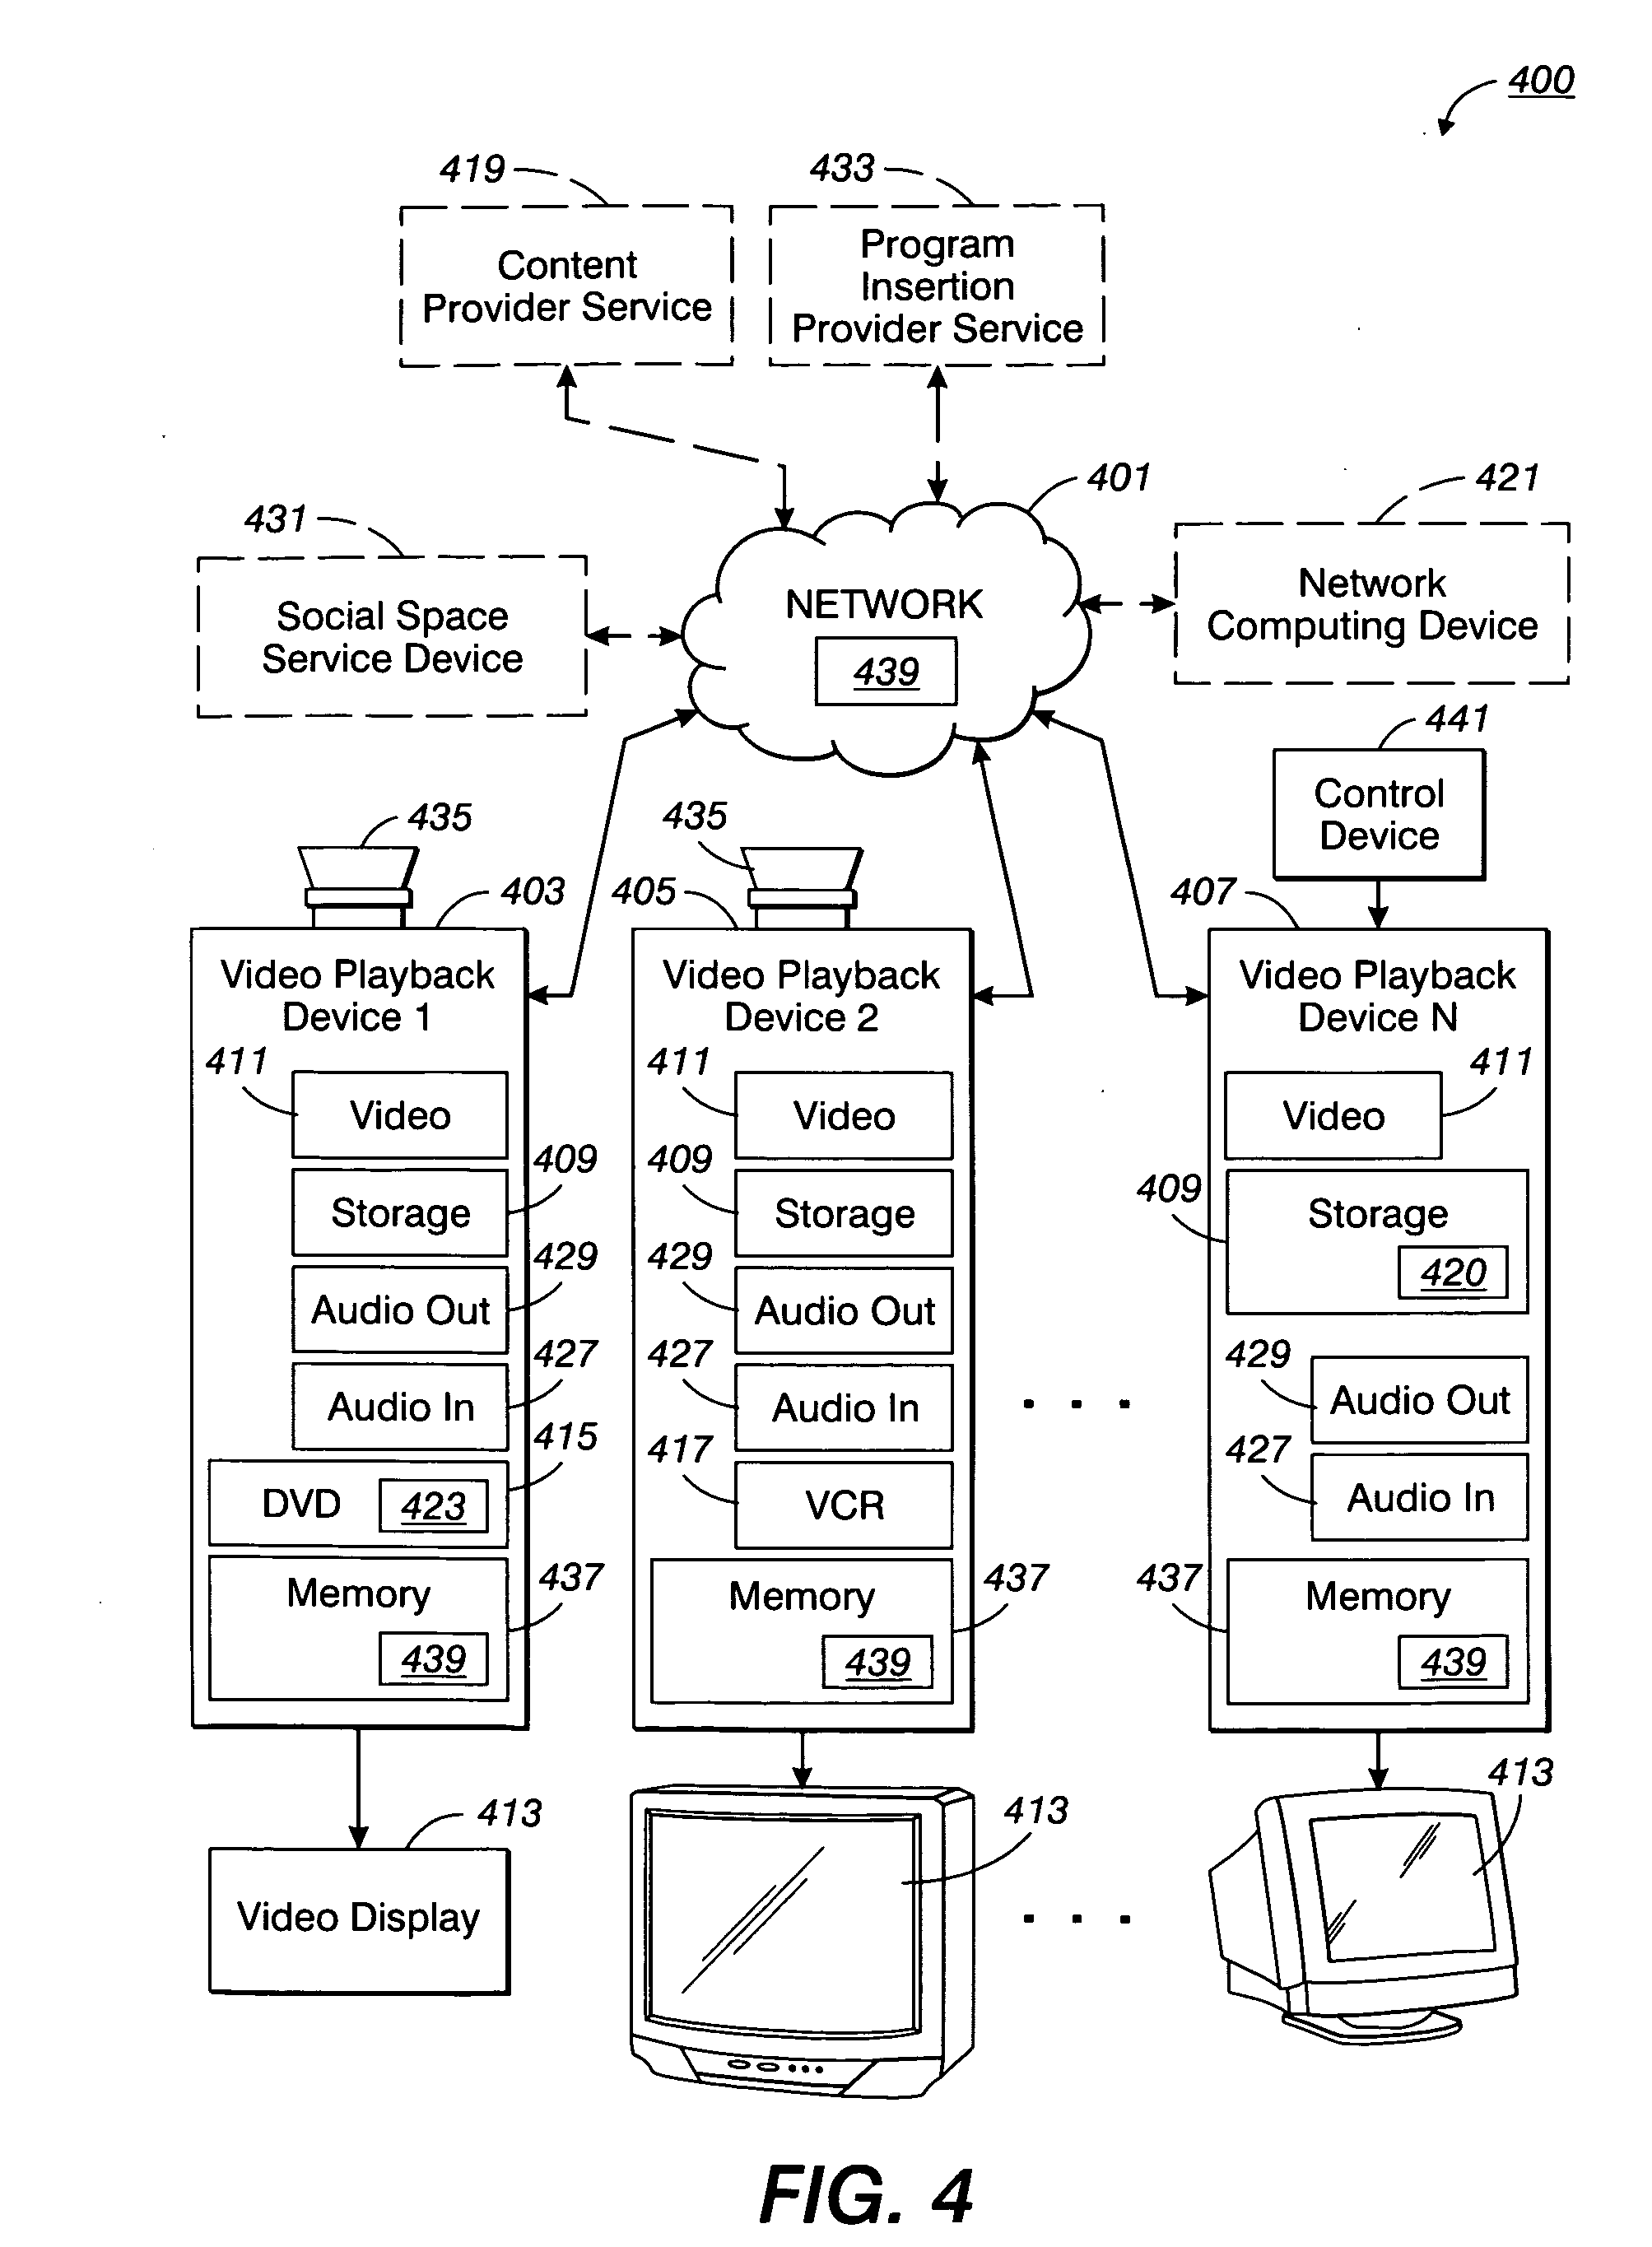 Method and apparatus for associating commentary audio with a position in an experiential data stream